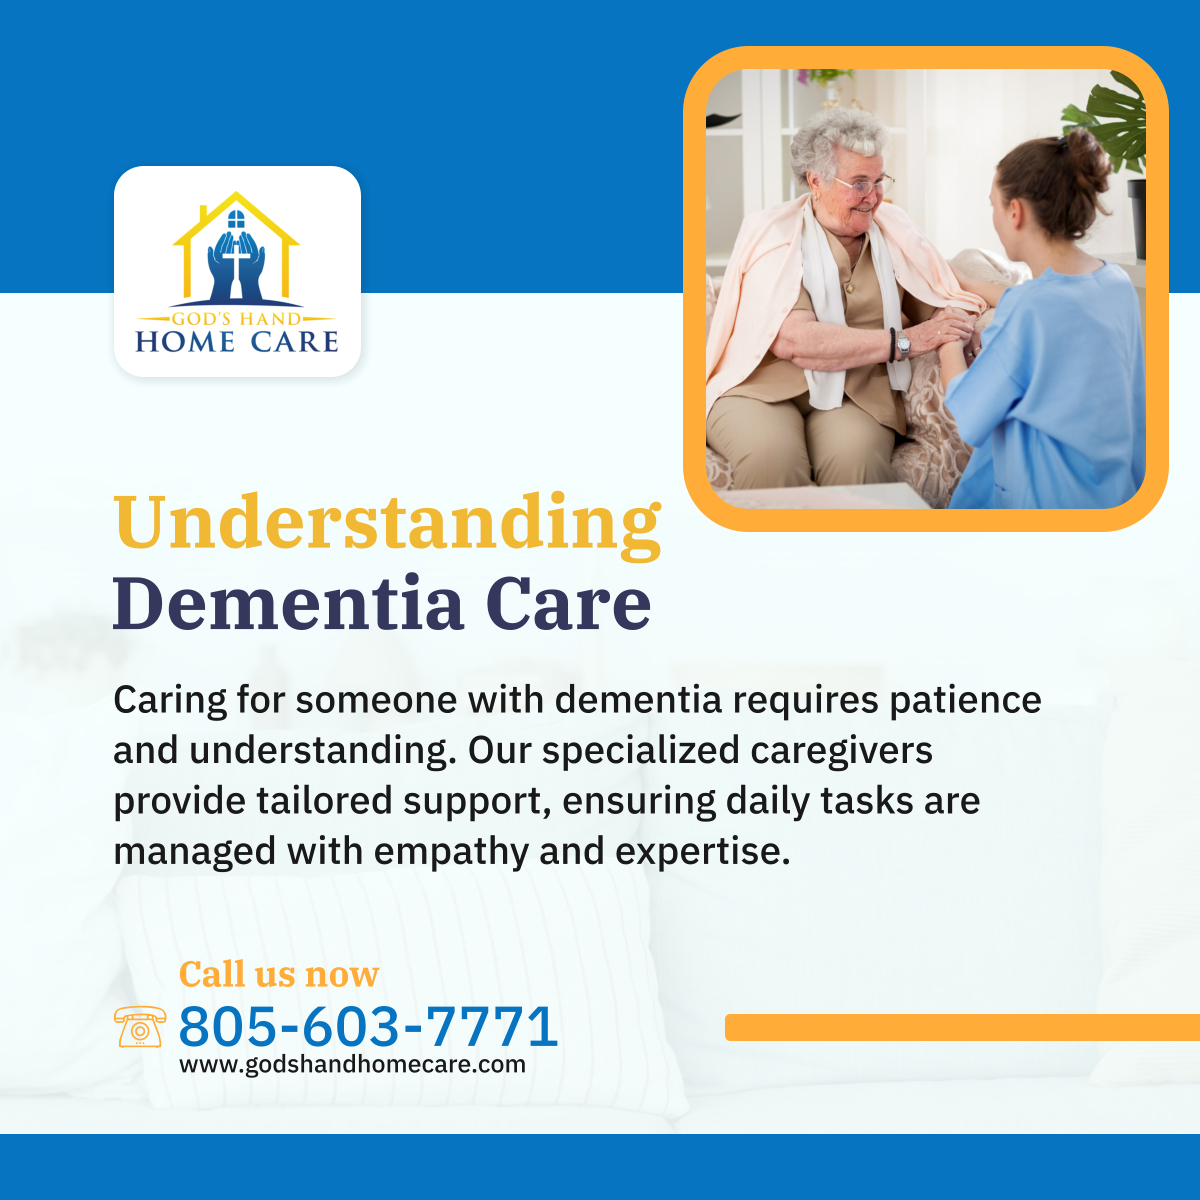 Navigate dementia care with grace. Our professional team offers the support and guidance needed to maintain a gentle pace and dignity in daily activities. 

#OxnardCA #HomeCare #DementiaSupport